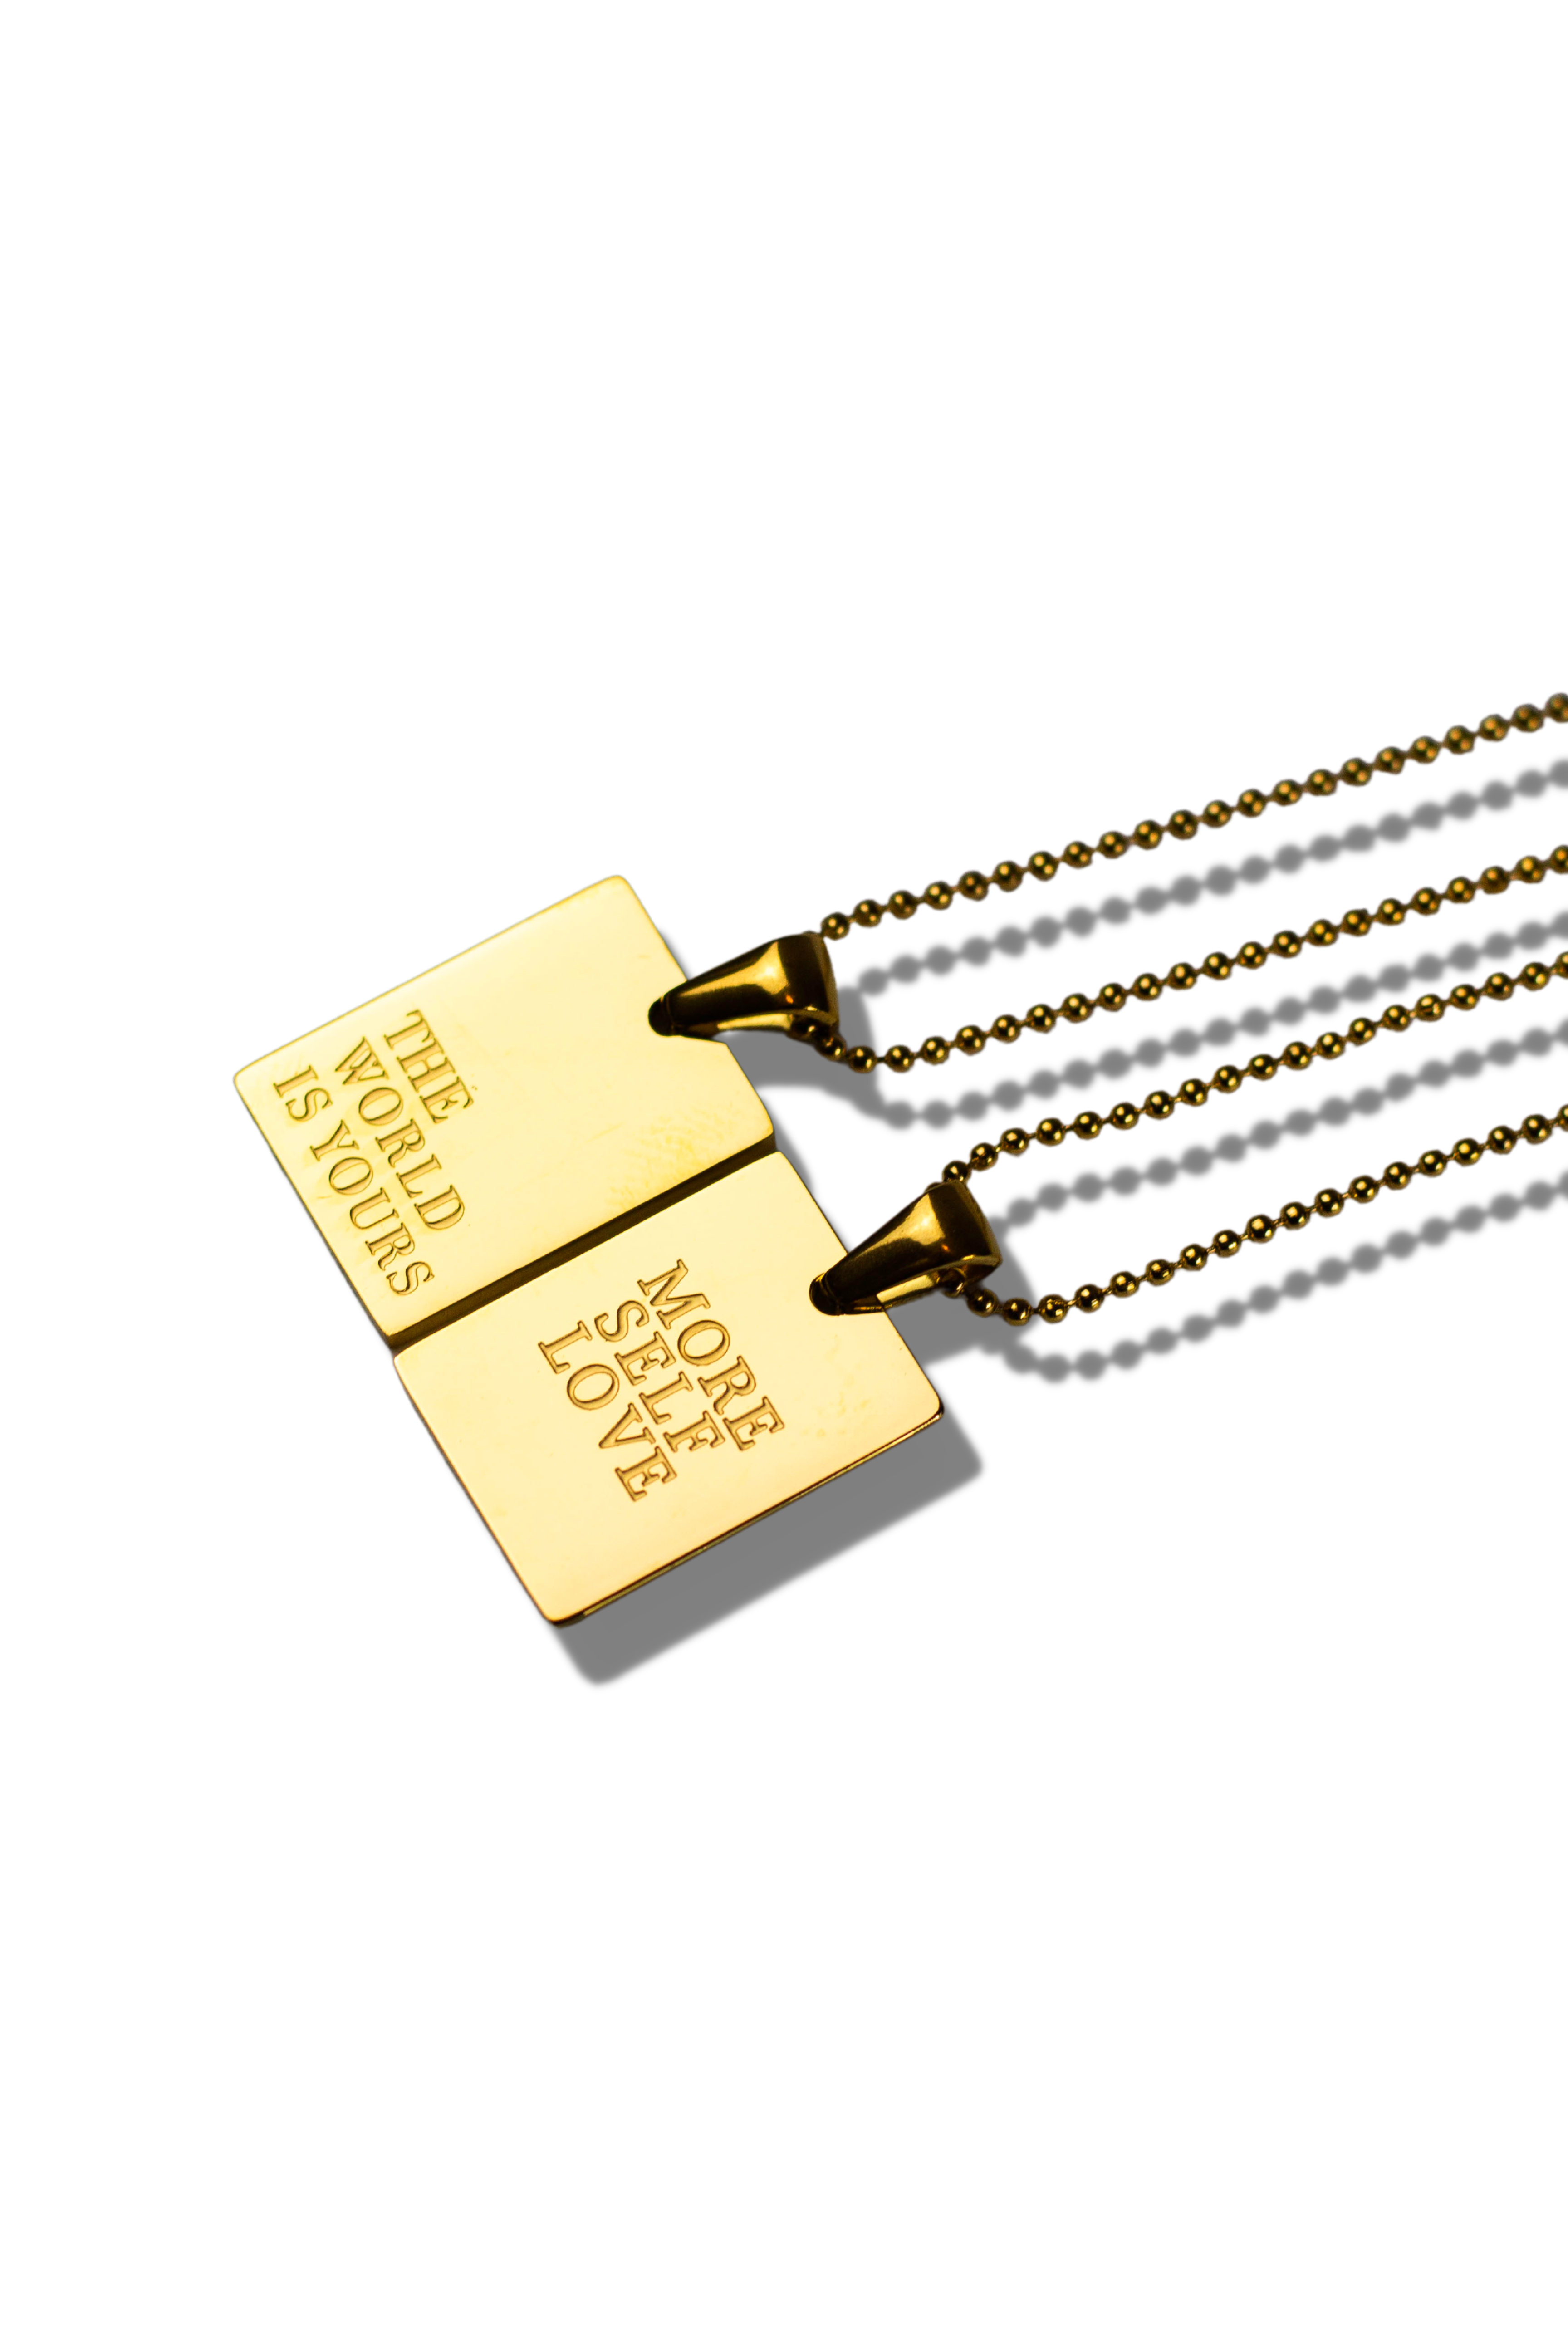 Two 18K stainless steel gold necklaces. The words printed on one of the necklaces are, "THE WORLD IS YOURS" and "MORE SELF LOVE" on the other necklace. The picture is presented sideways.